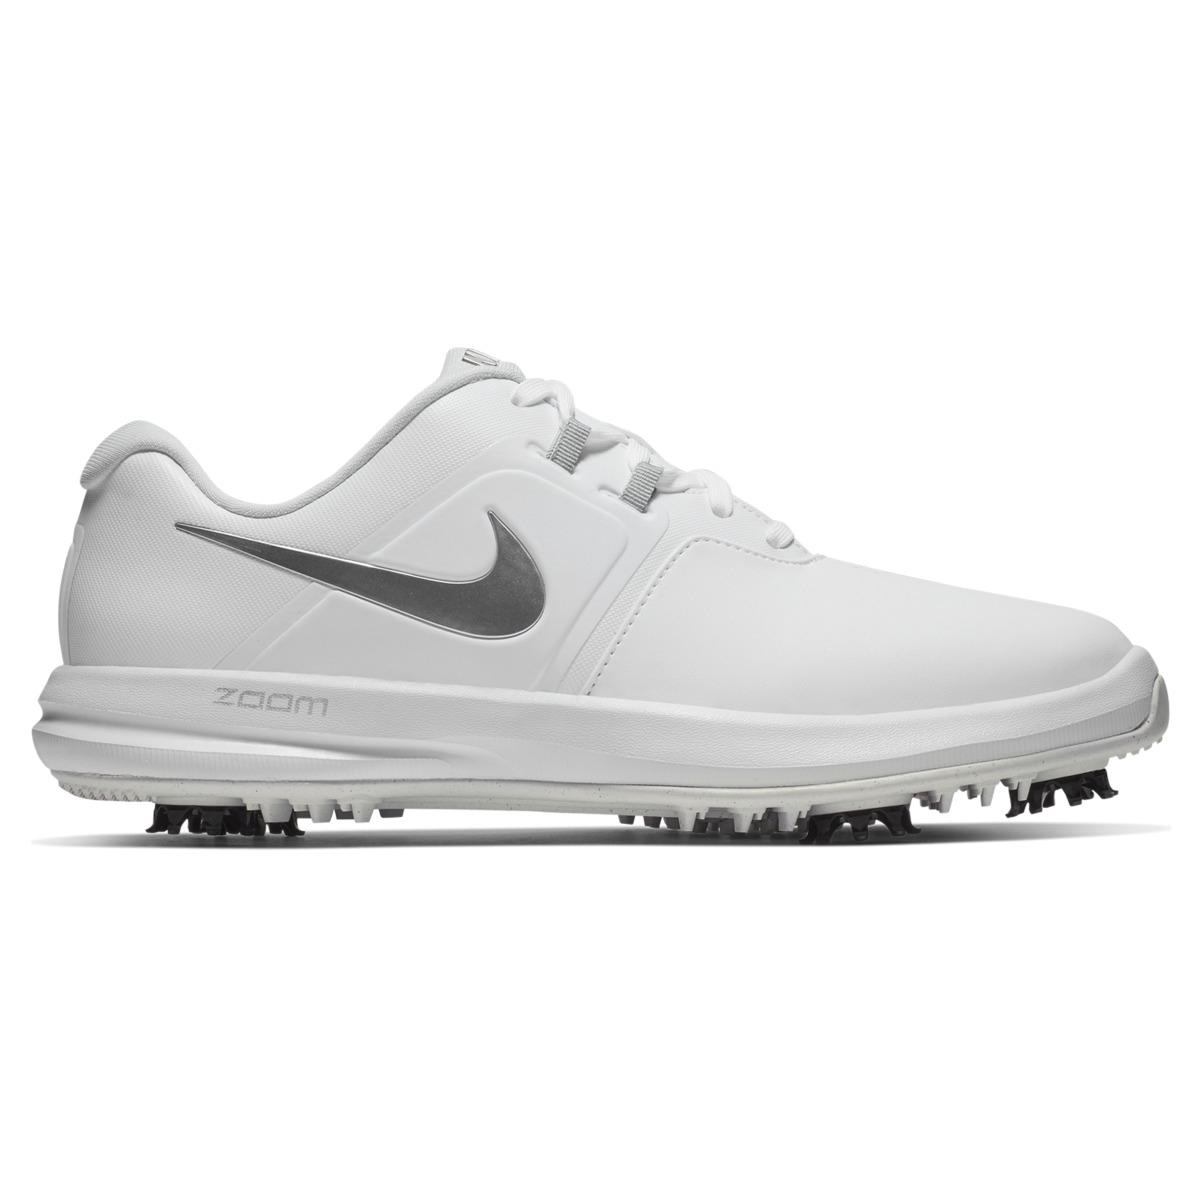 Nike Synthetic Air Zoom Victory Golf Shoes in White - Lyst